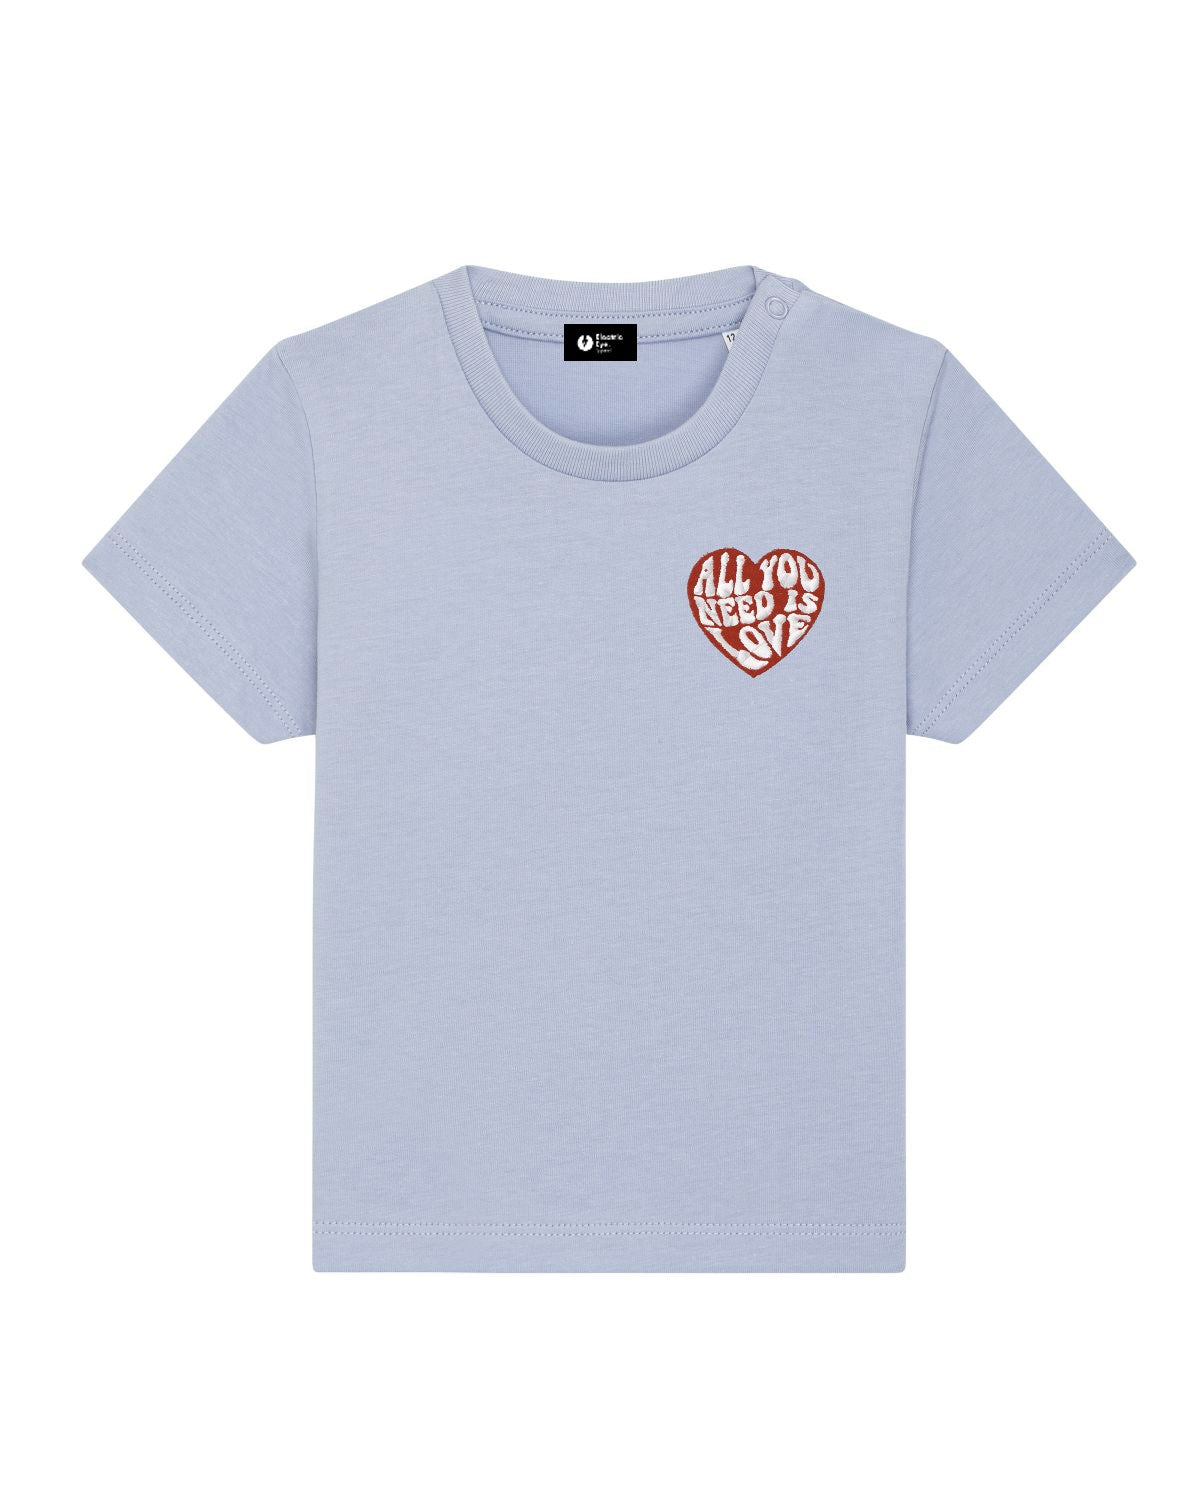 ‘ALL YOU NEED IS LOVE’ RETRO 70’S EMBROIDERED BABY'S ORGANIC COTTON CREW NECK 'MINI-CREATOR' T-SHIRT